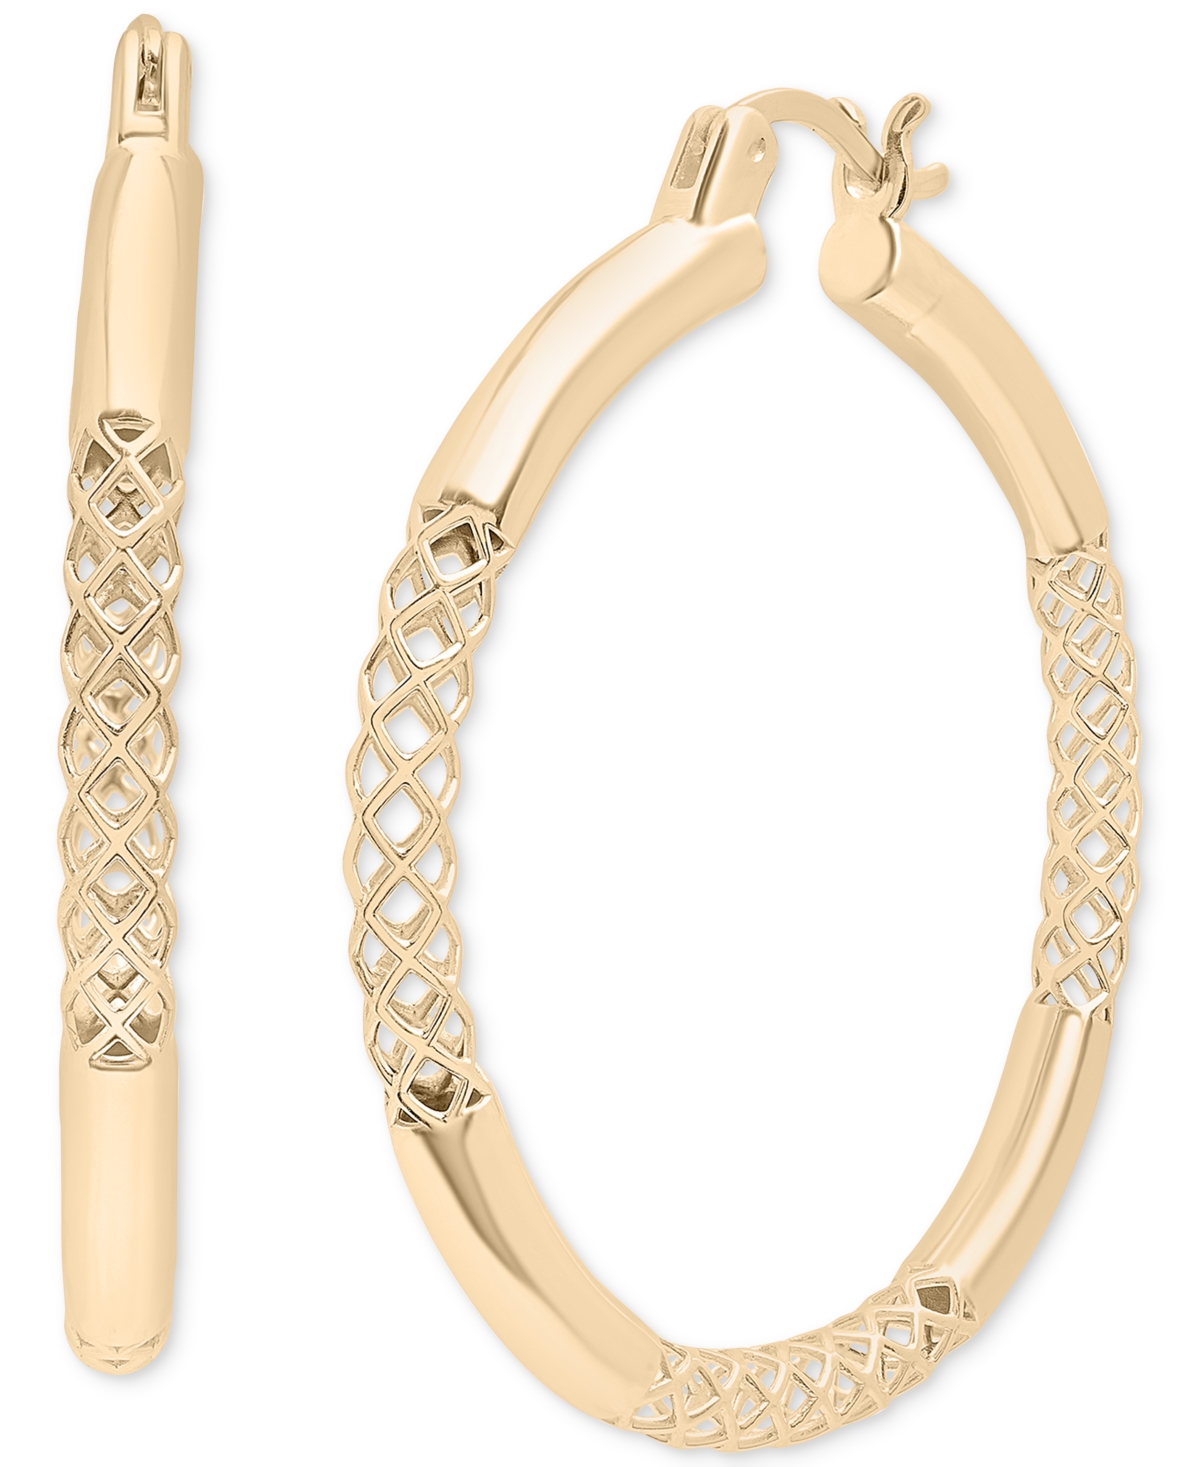 Audrey By Aurate Lattice Extra Small Hoop Earrings In Gold Vermeil, Created For Macy's